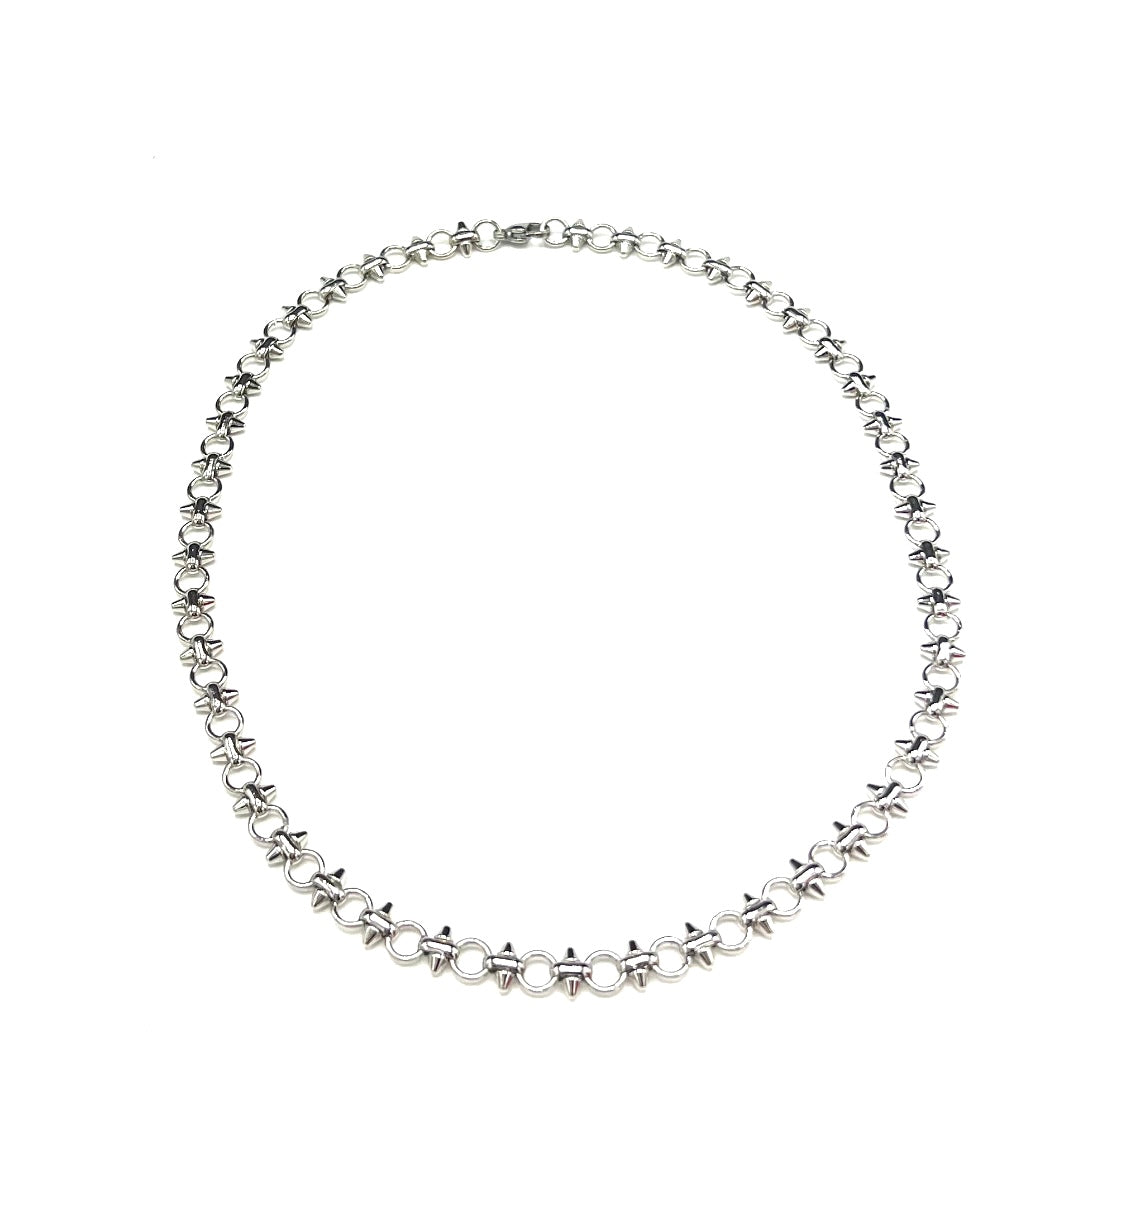 ROUND LINK SILVER NECKLACE